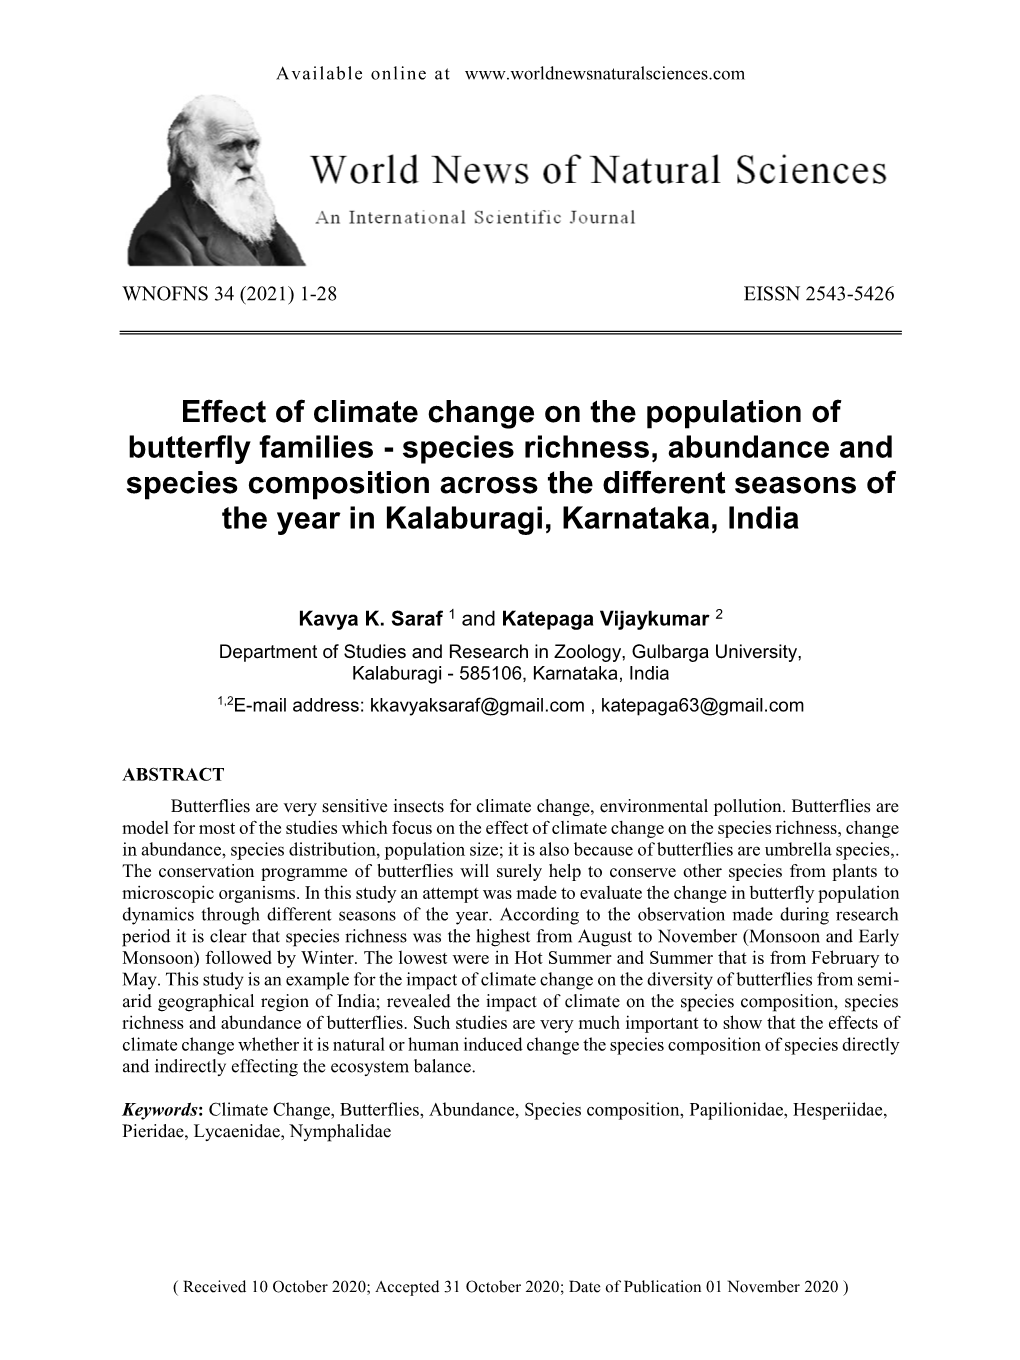 Species Richness, Abundance and Species Composition Across the Different Seasons of the Year in Kalaburagi, Karnataka, India